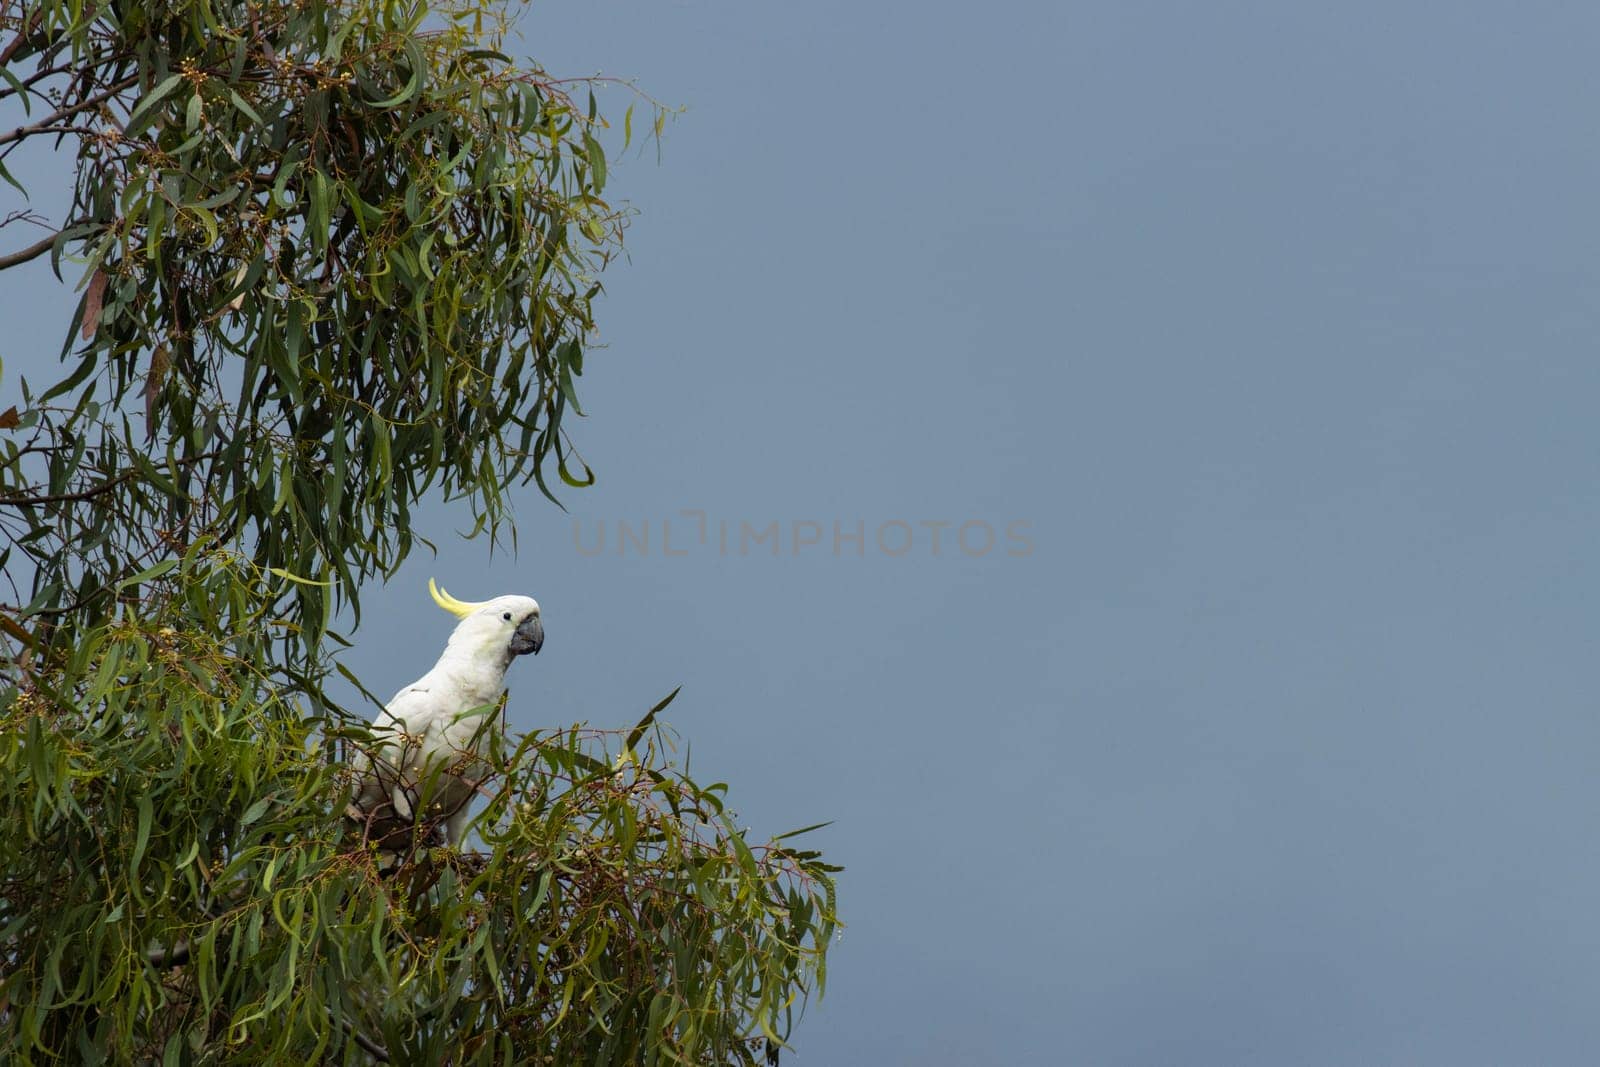 Wild sulphur-crested cockatoo perched in tree with grey skies by StefanMal